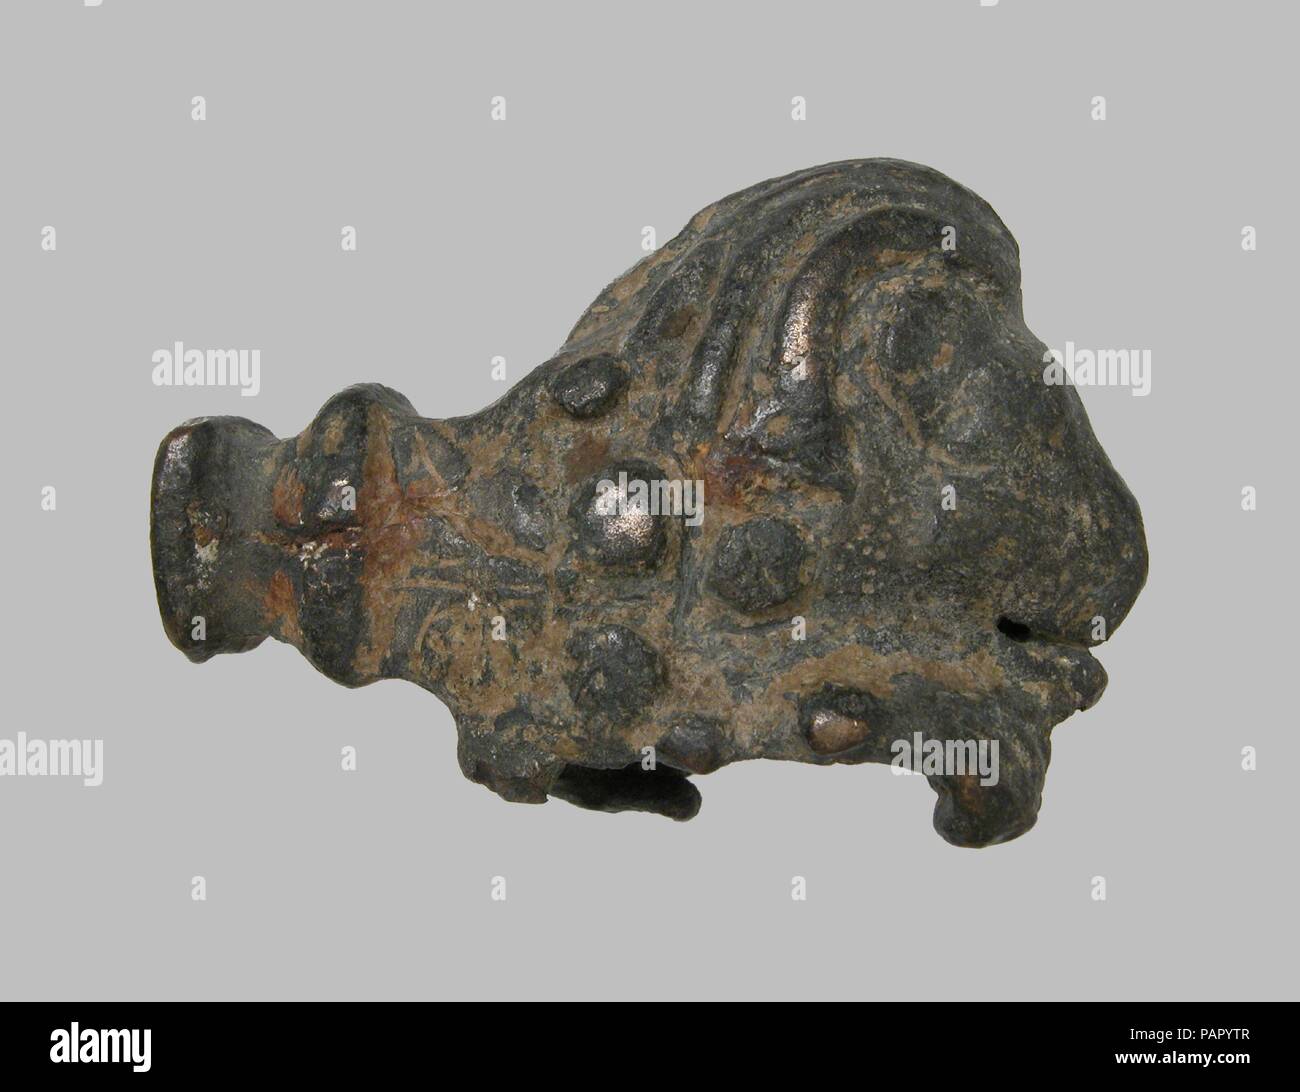 Key Handle. Culture: Roman. Dimensions: Overall: 2 7/16 x 1 3/4 x 7/8 in. (6.2 x 4.4 x 2.3 cm). Date: 1st-7th century. Museum: Metropolitan Museum of Art, New York, USA. Stock Photo